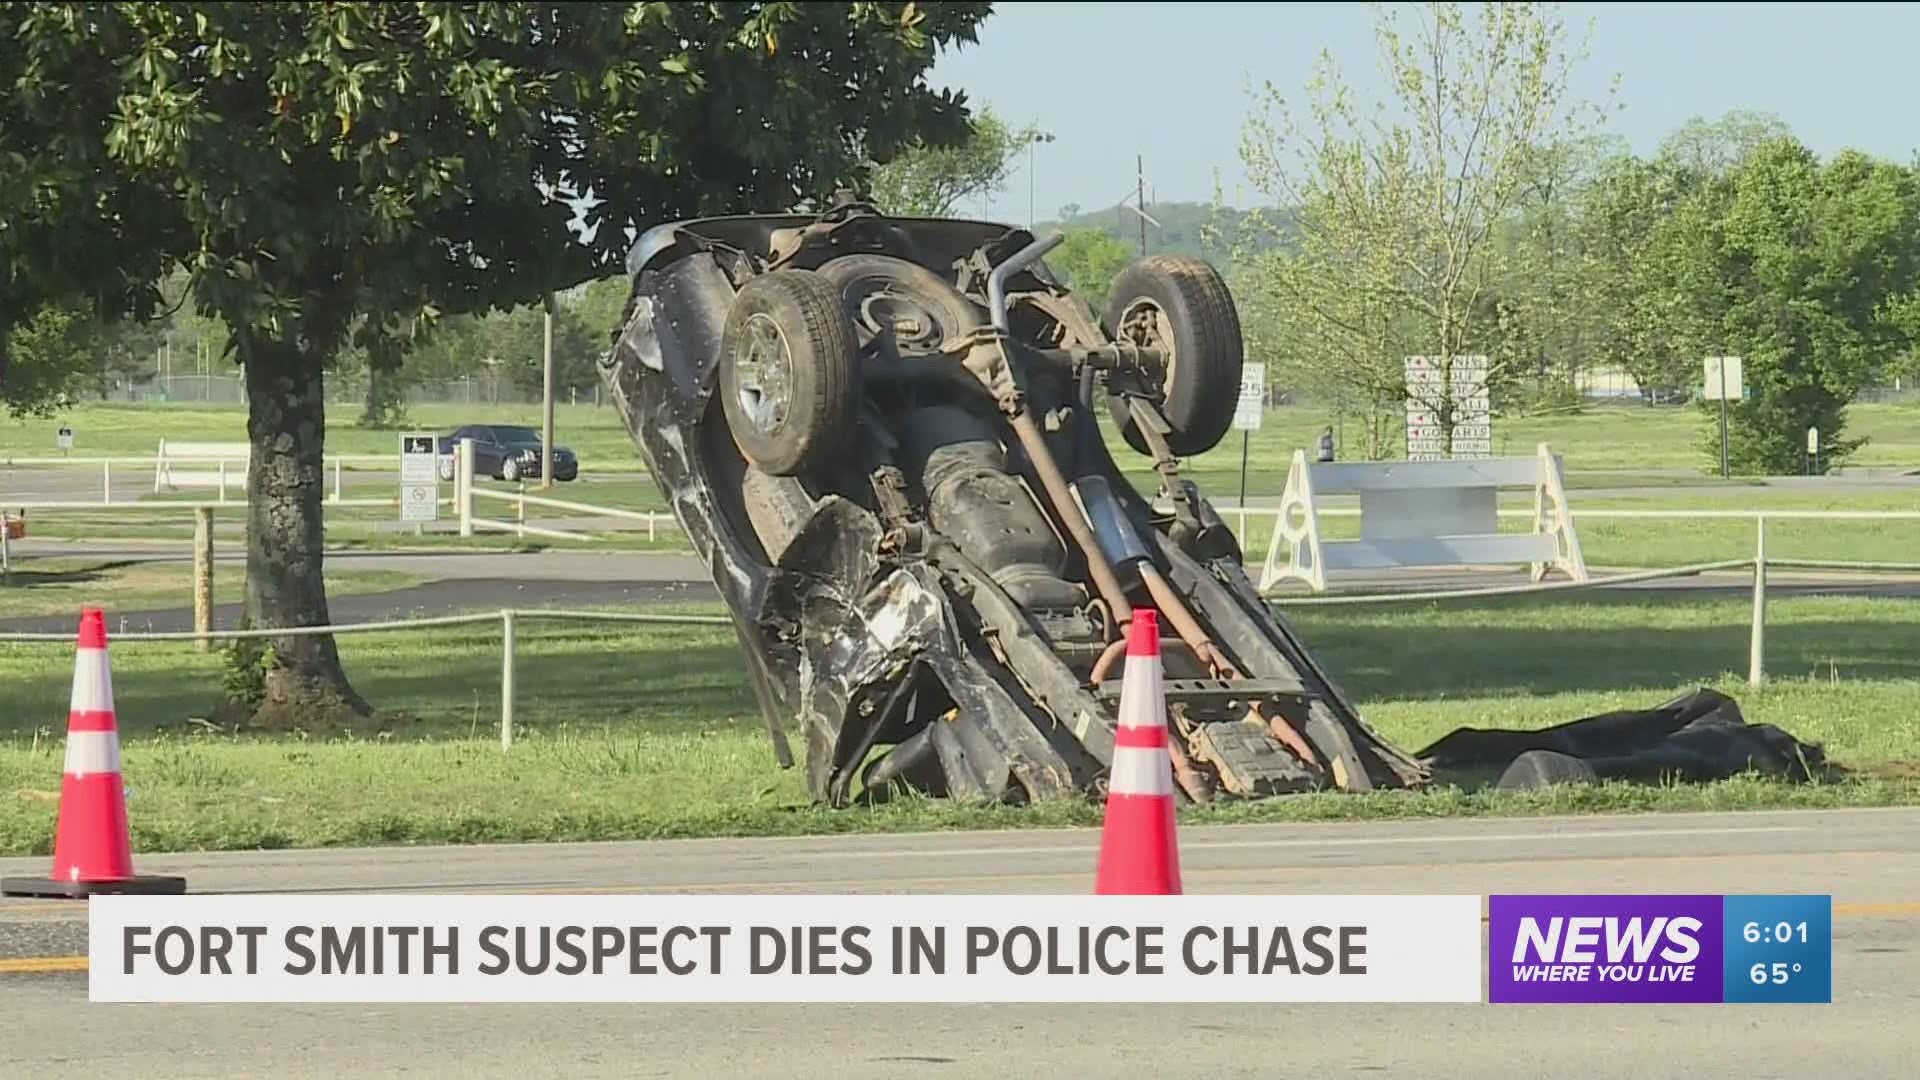 Fort Smith man dies in police chase